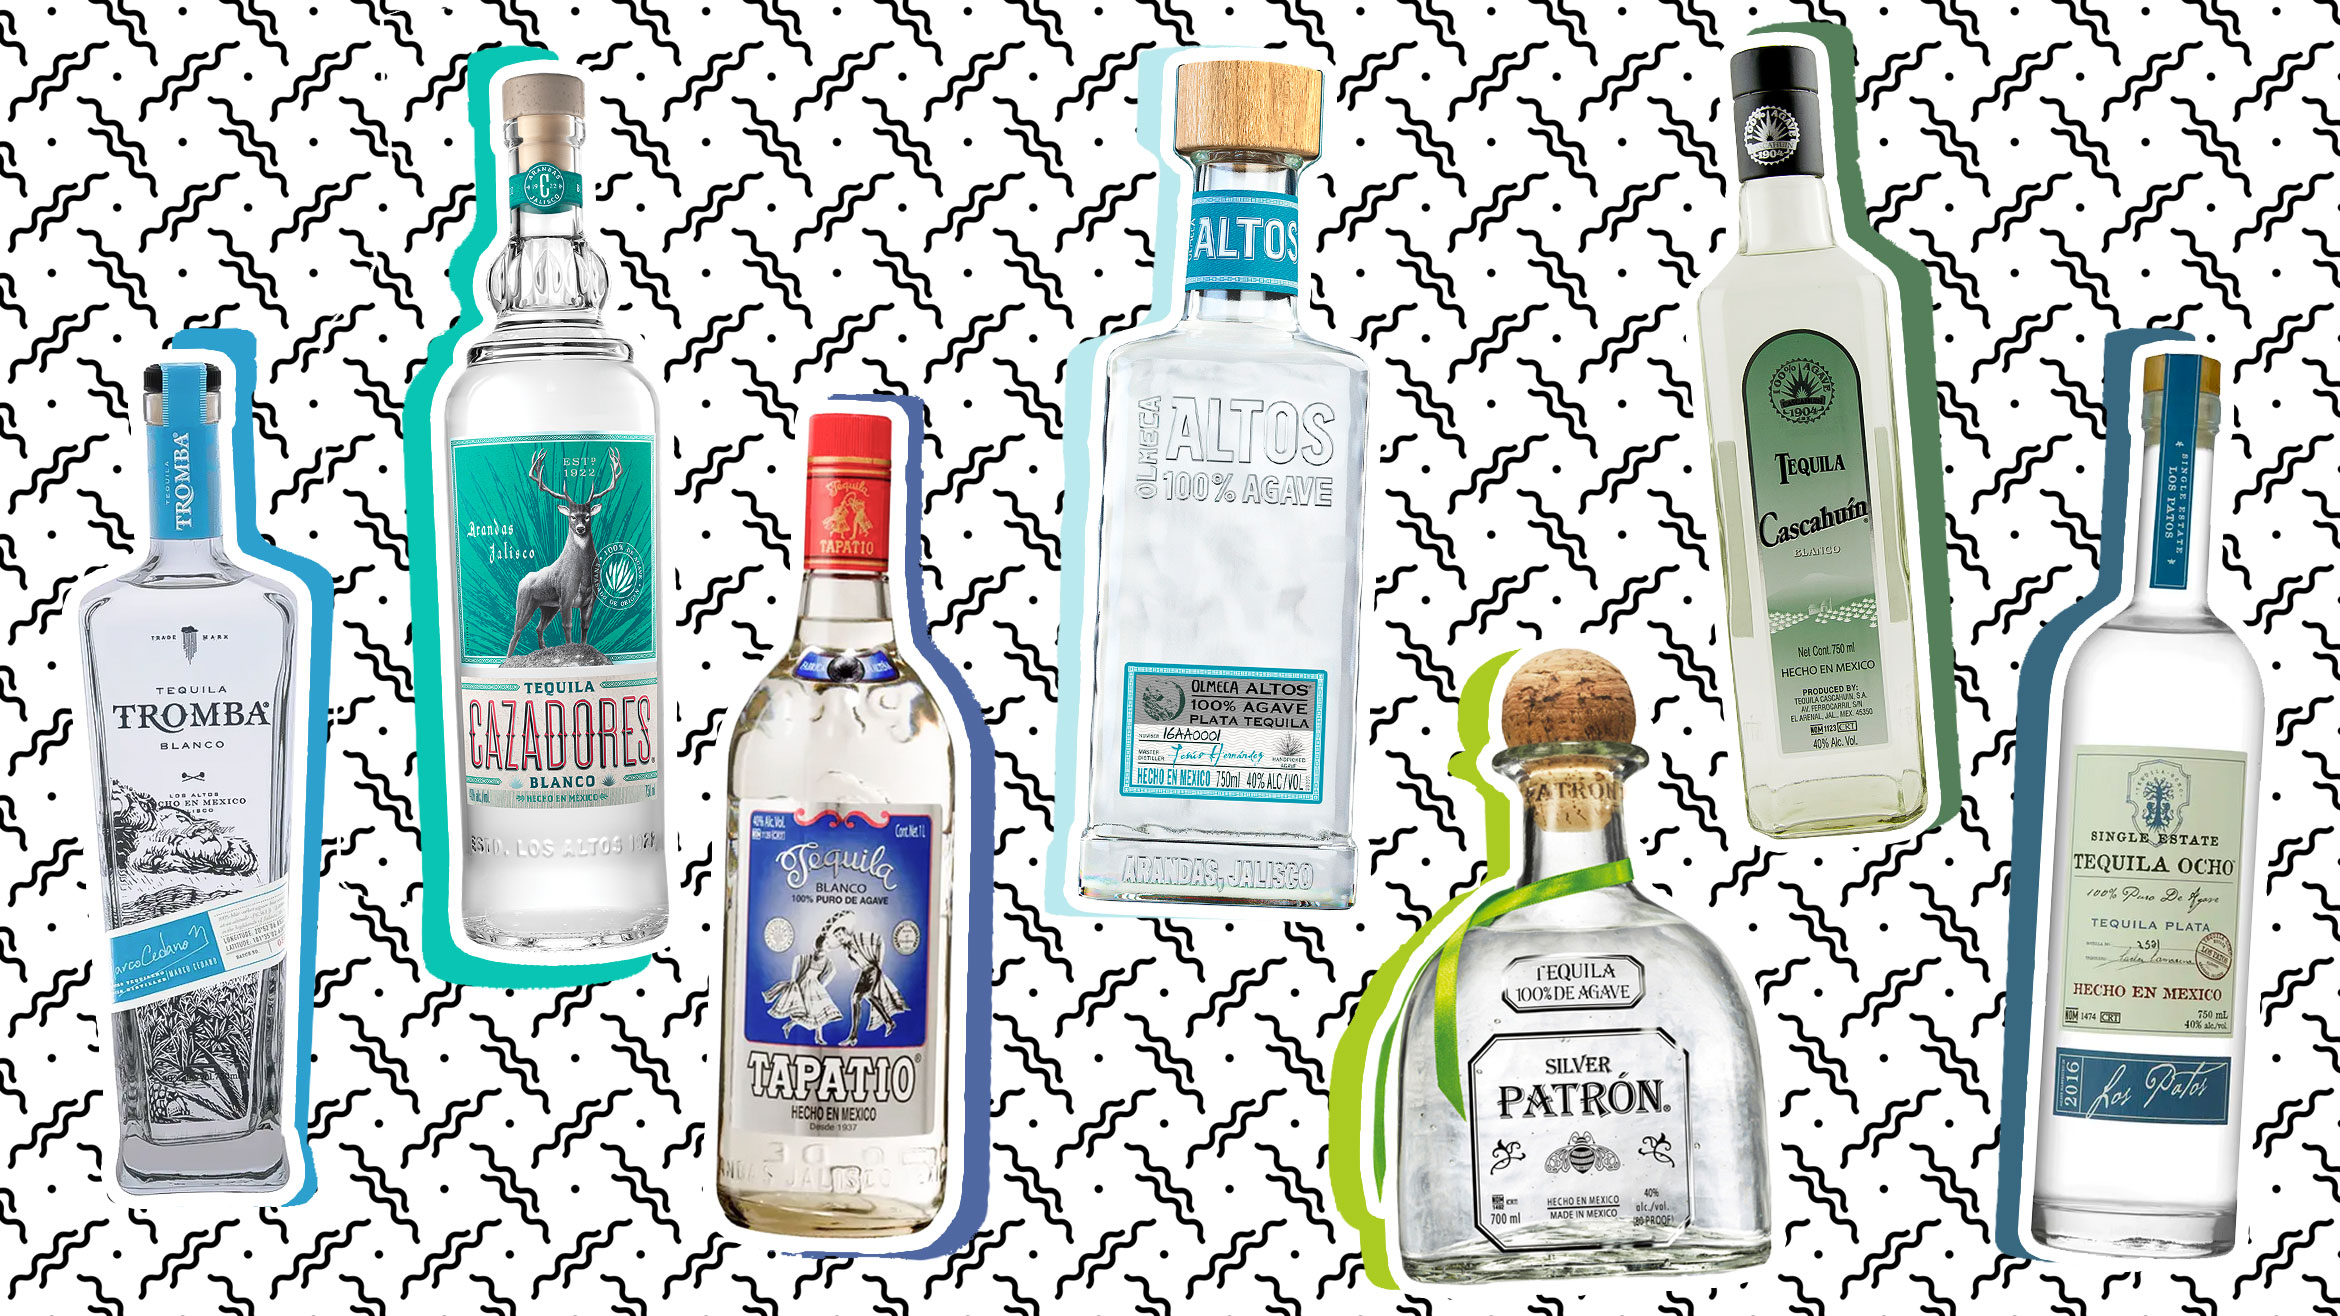 The Best Blanco Tequilas for Mixing, According to Bartenders